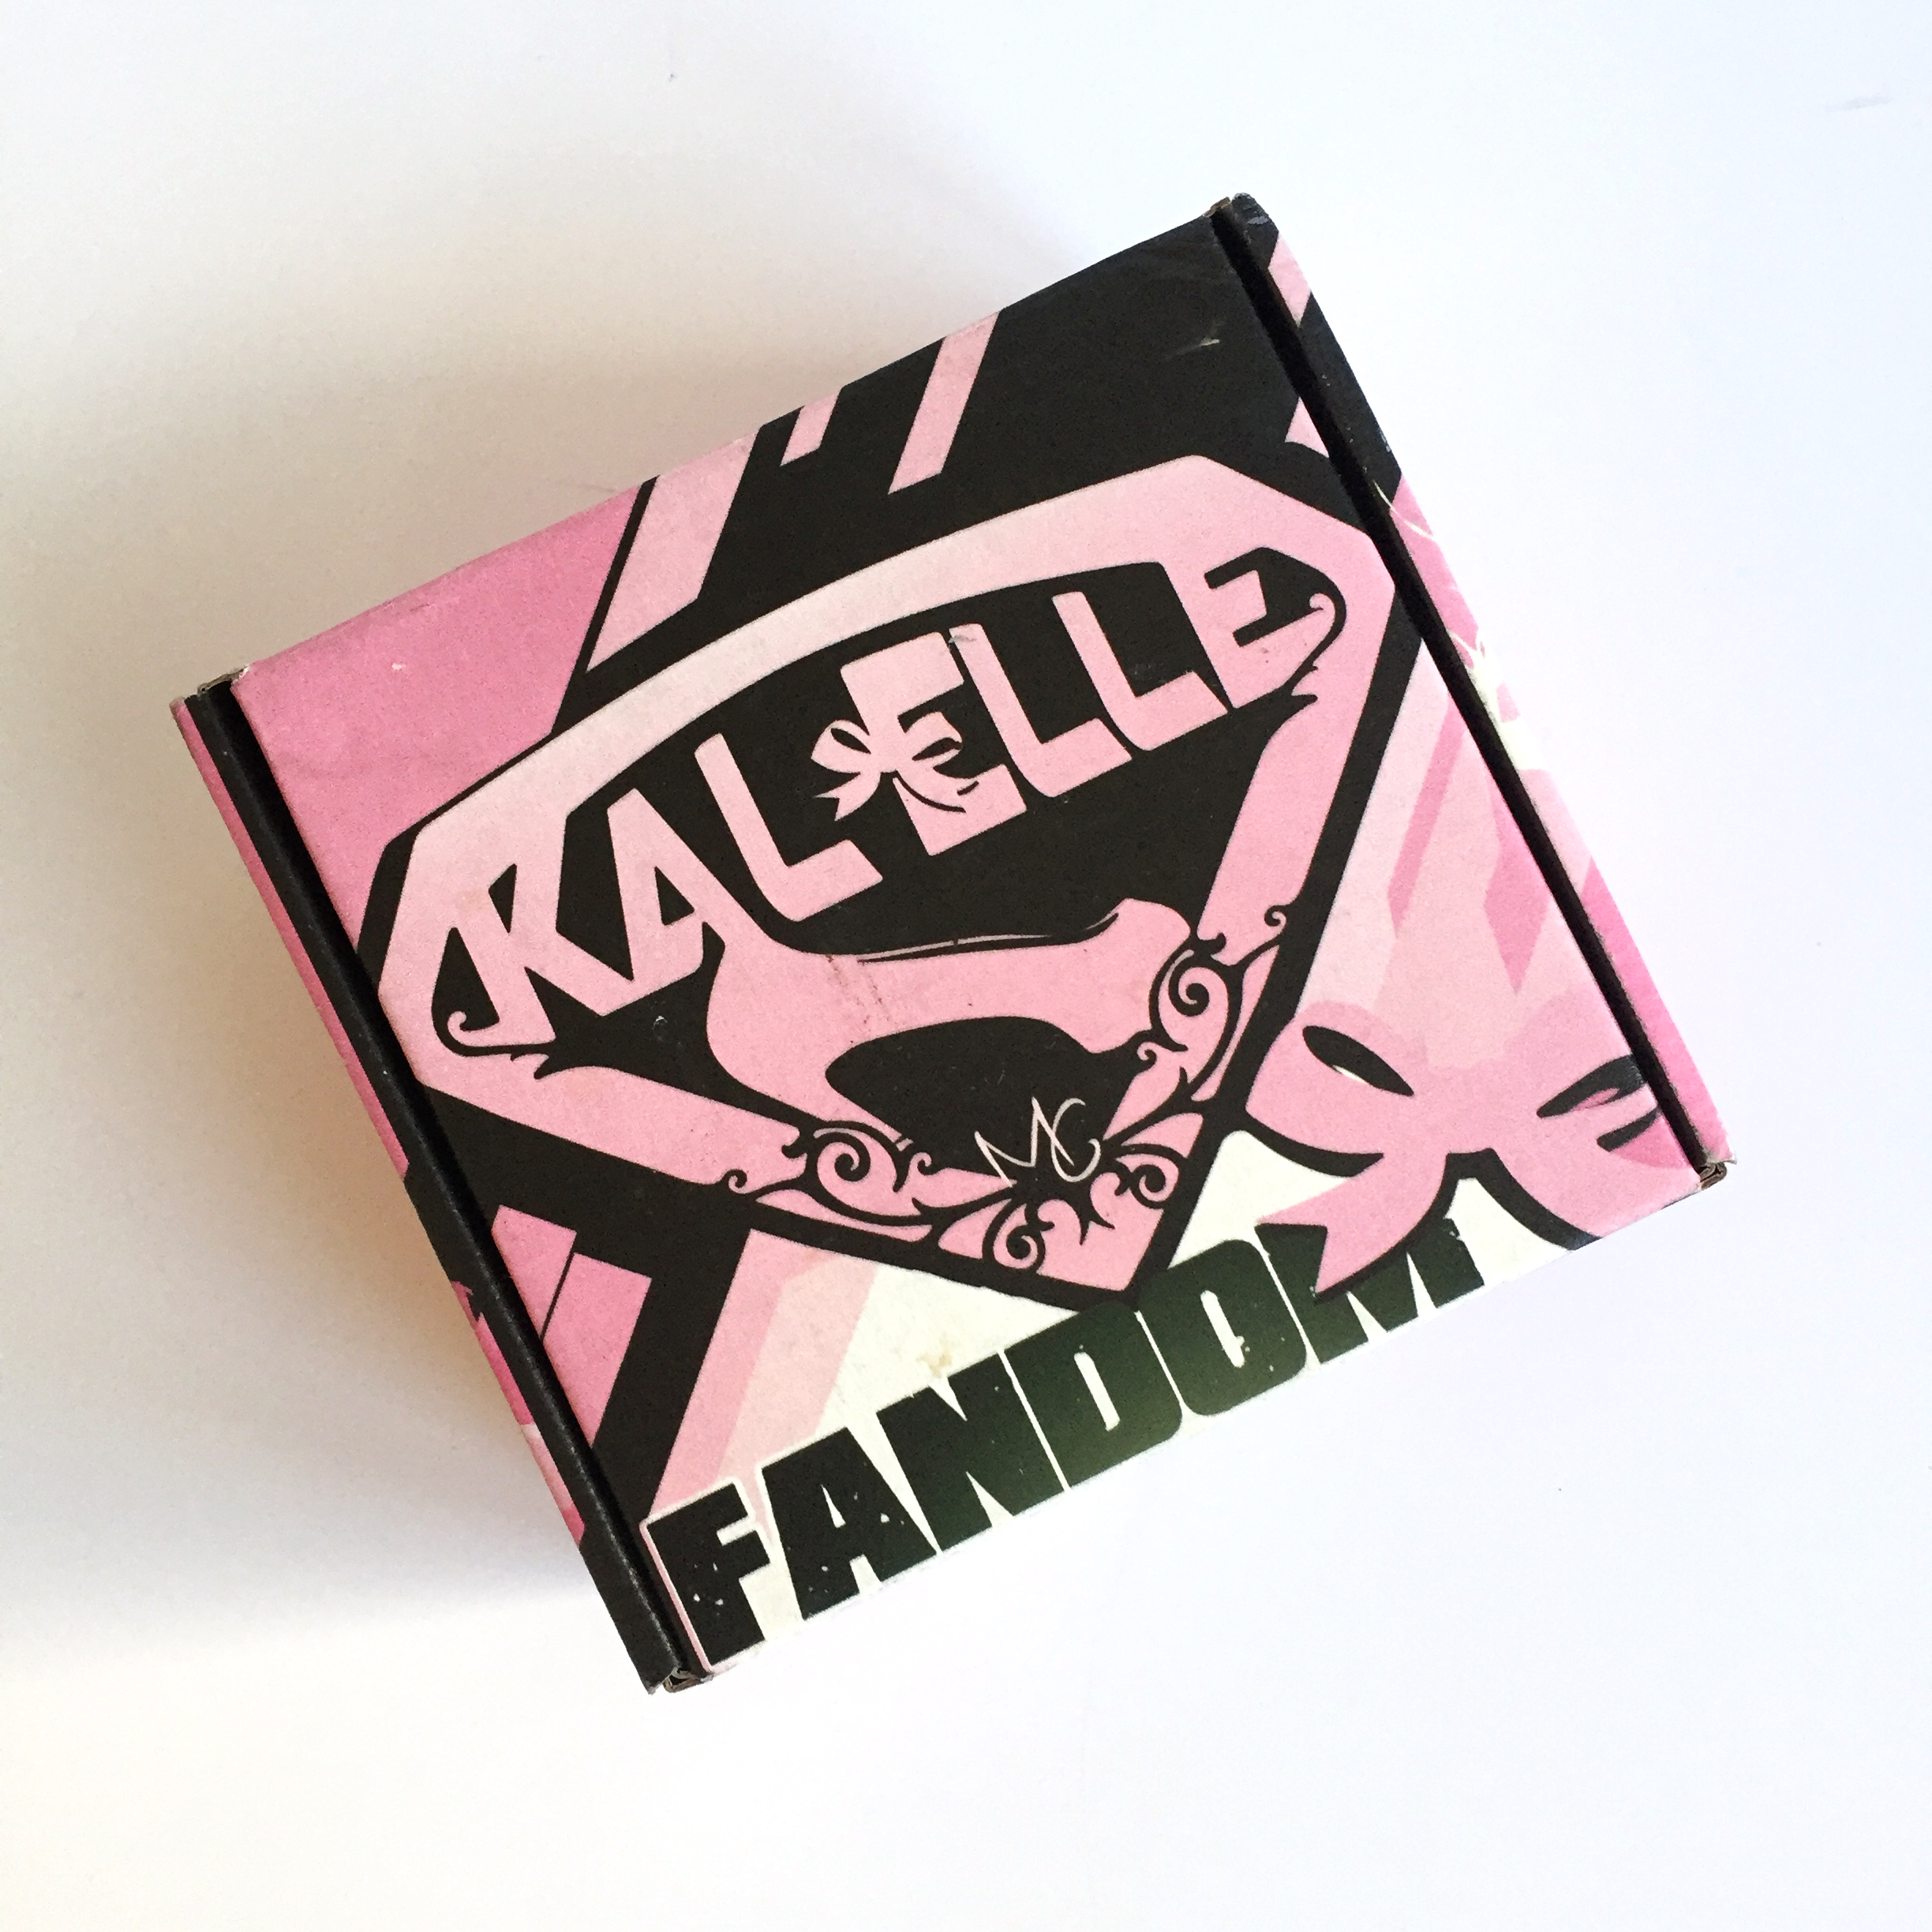 Kal-Elle Fandom Monthly Box Review + Coupon – October 2017